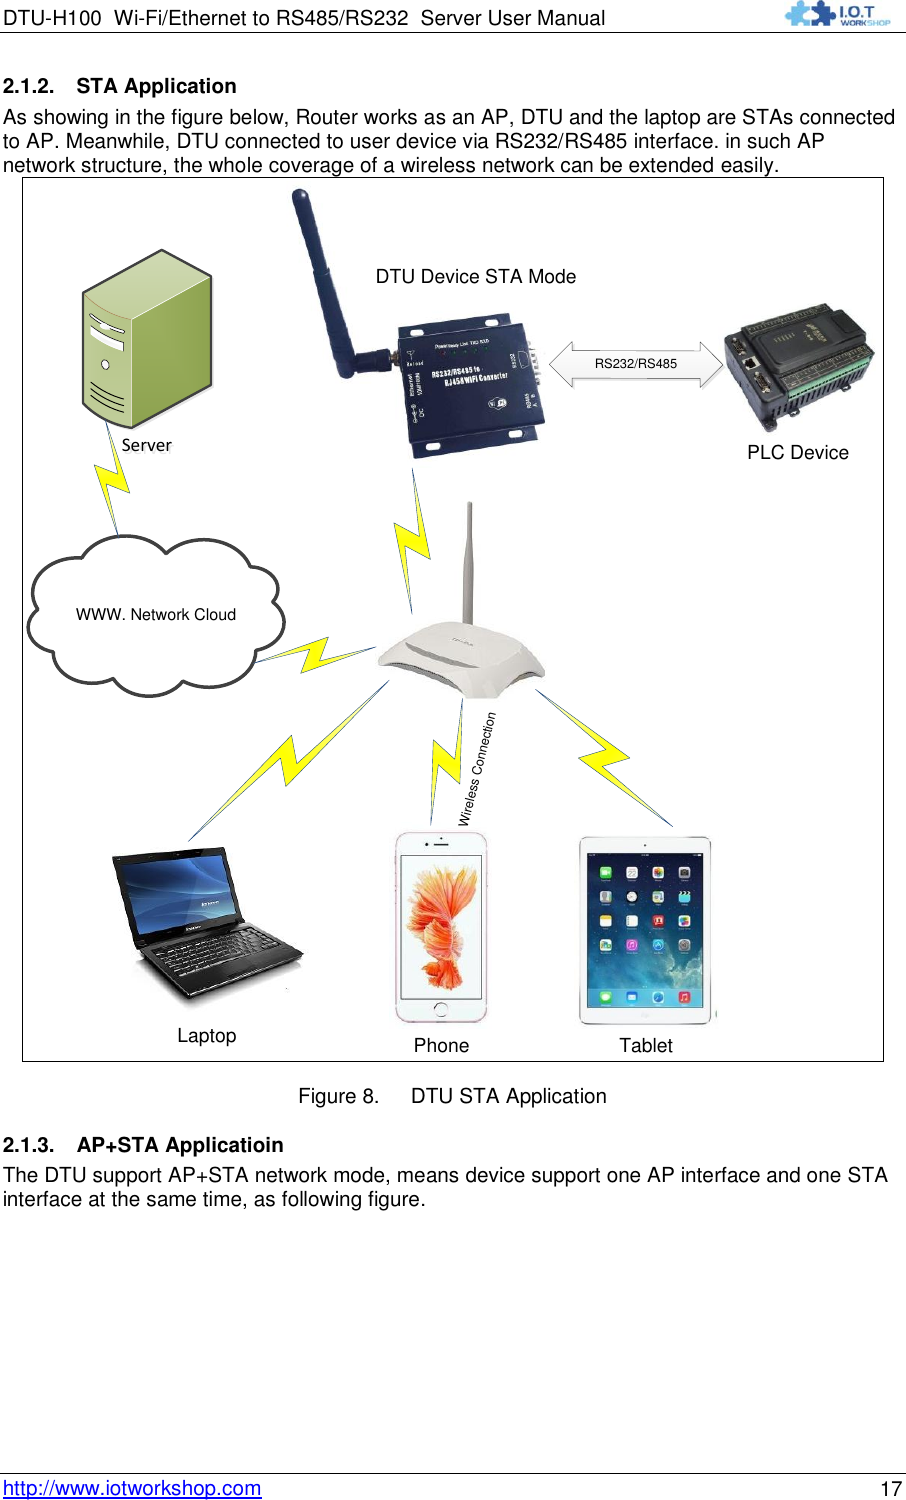 DTU-H100 Wi-Fi/Ethernet to RS485/RS232  Server User Manual    http://www.iotworkshop.com 17 2.1.2. STA Application As showing in the figure below, Router works as an AP, DTU and the laptop are STAs connected to AP. Meanwhile, DTU connected to user device via RS232/RS485 interface. in such AP network structure, the whole coverage of a wireless network can be extended easily.  PhoneLaptopPLC DeviceTabletWireless ConnectionRS232/RS485DTU Device STA ModeServerServerWWW. Network Cloud Figure 8. DTU STA Application 2.1.3. AP+STA Applicatioin The DTU support AP+STA network mode, means device support one AP interface and one STA interface at the same time, as following figure. 